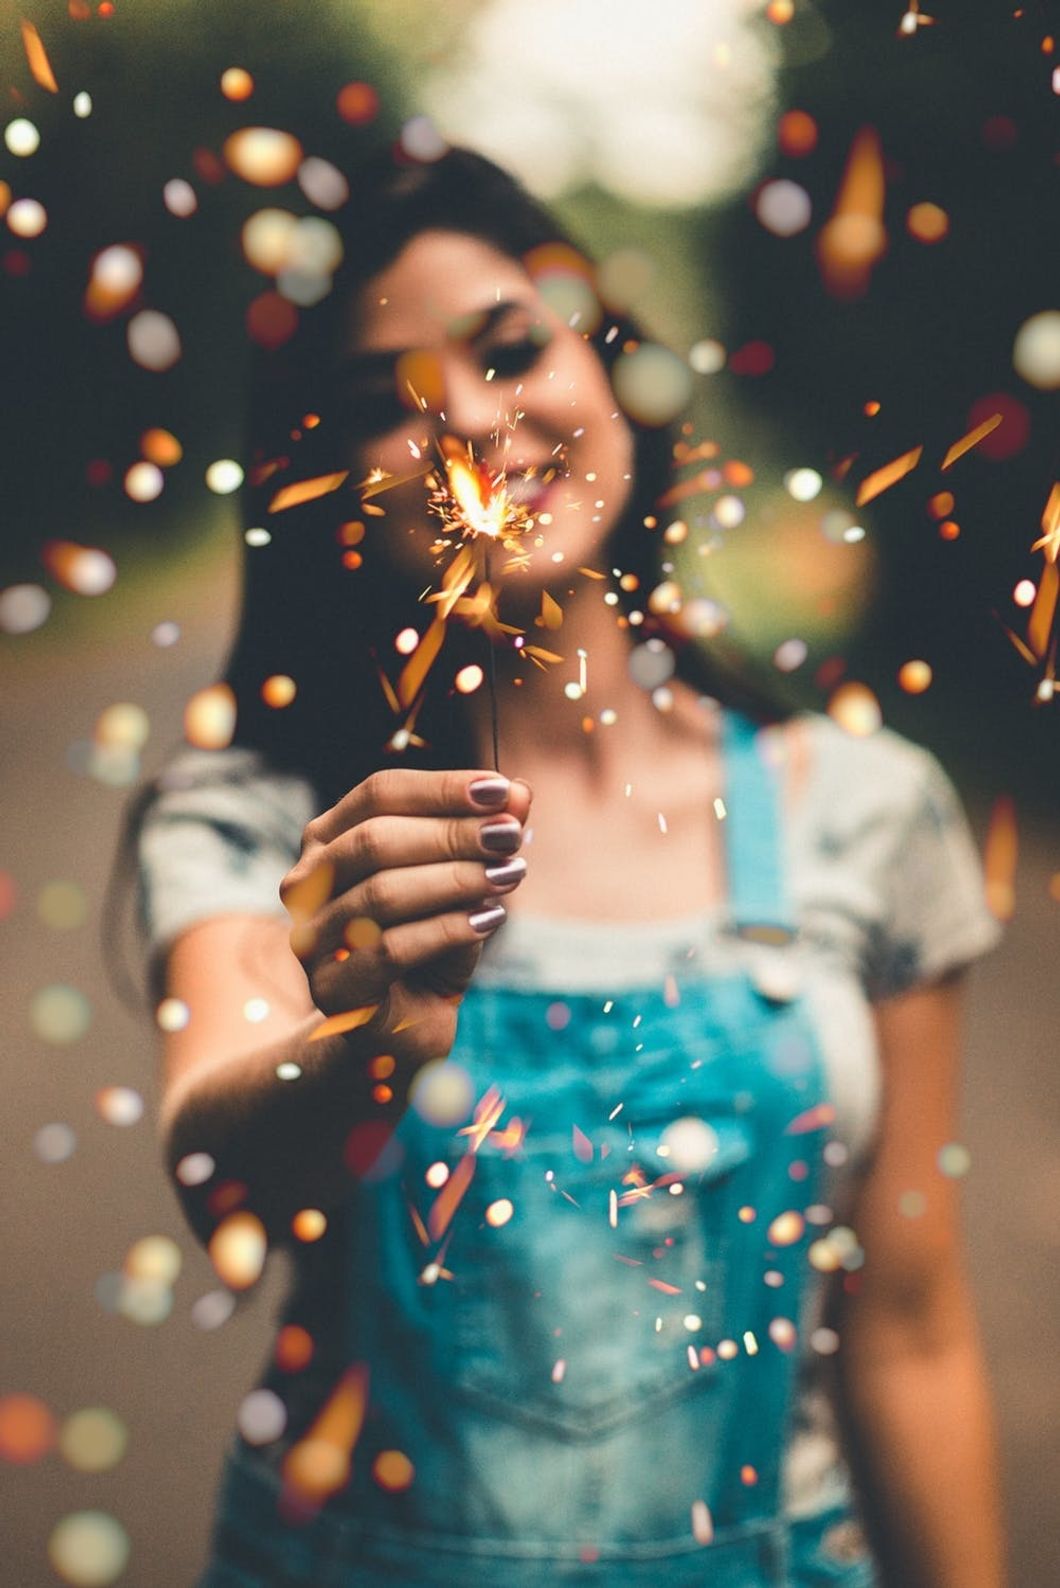 6 Ways To Make Your New Year's Resolutions Stick